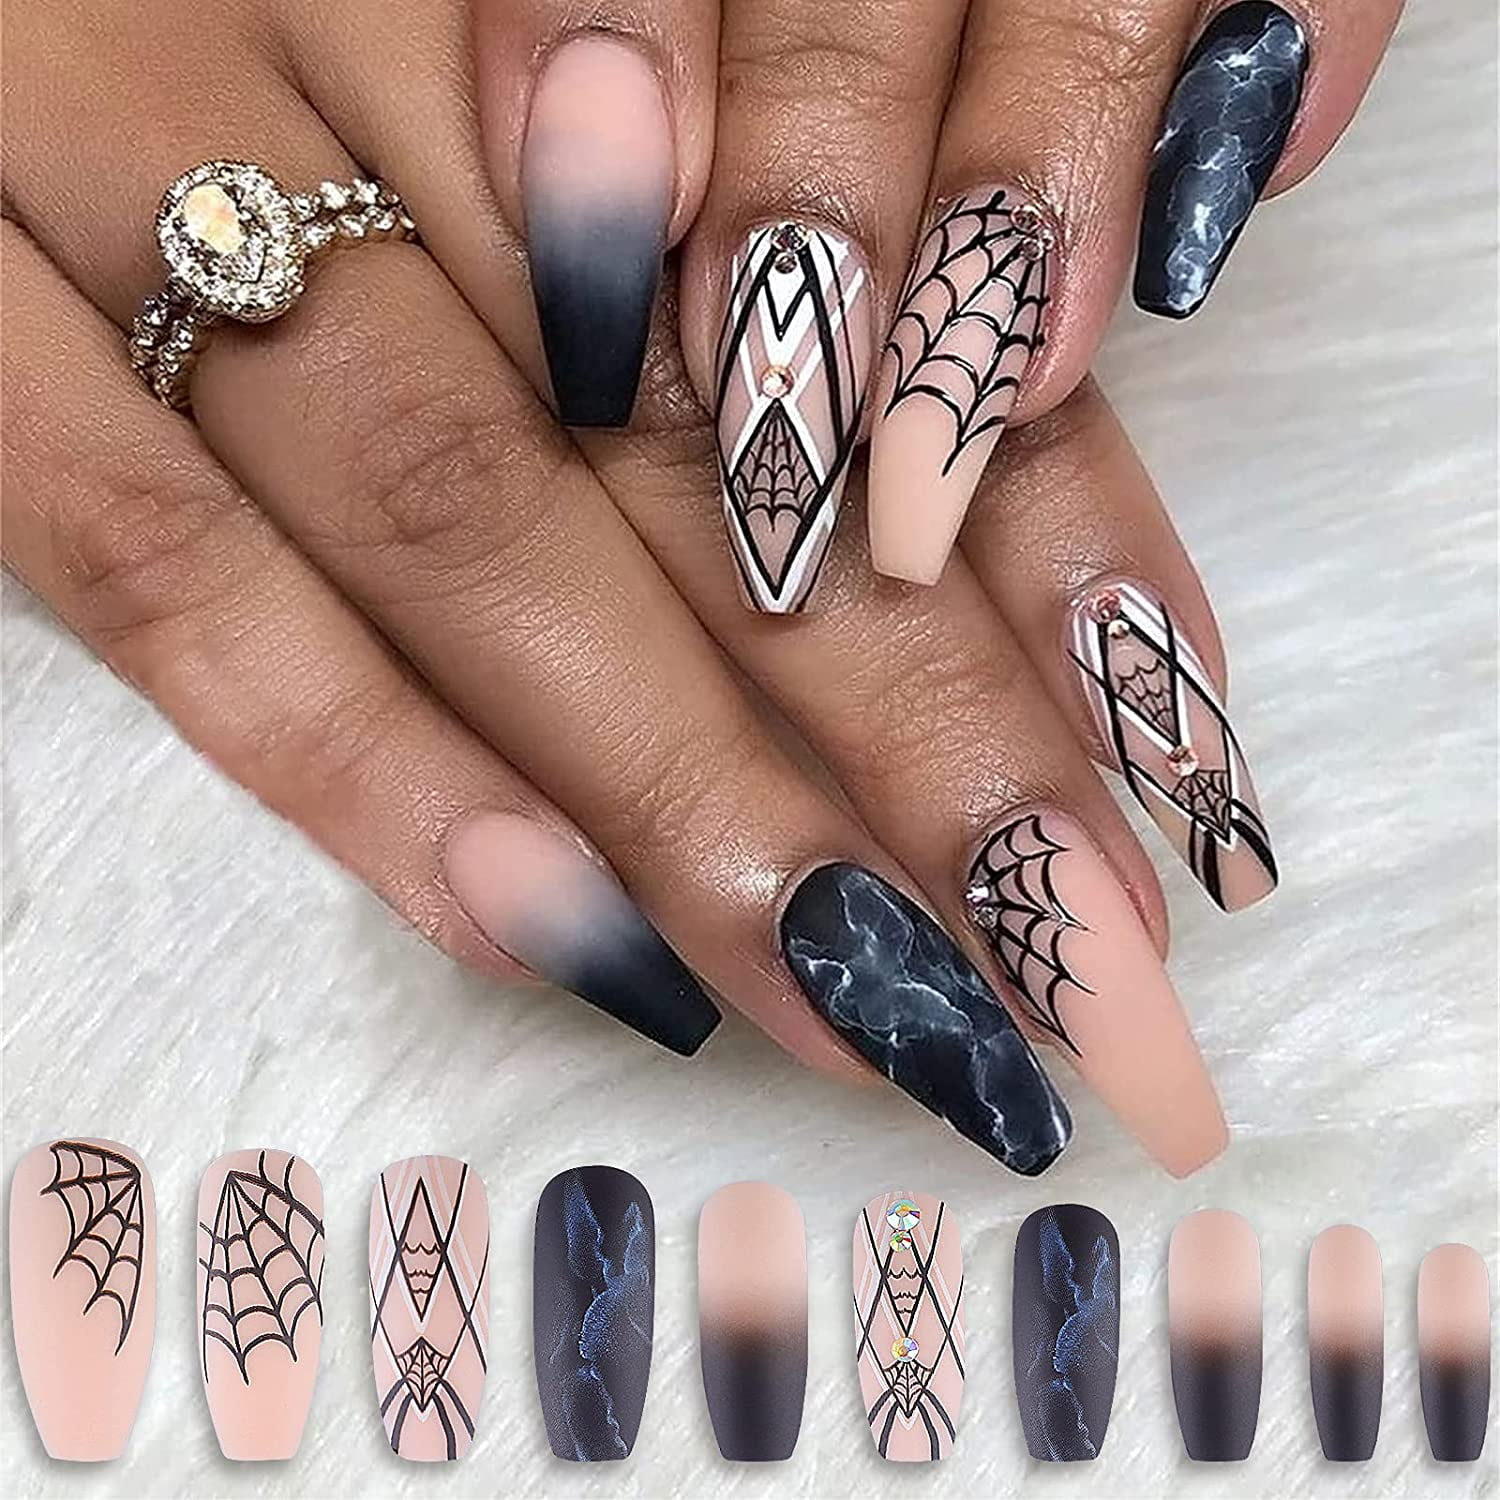 24 PCS Press on Nails Long Coffin with Designs Spider Web Stick Glue on  Nails | Walmart Canada